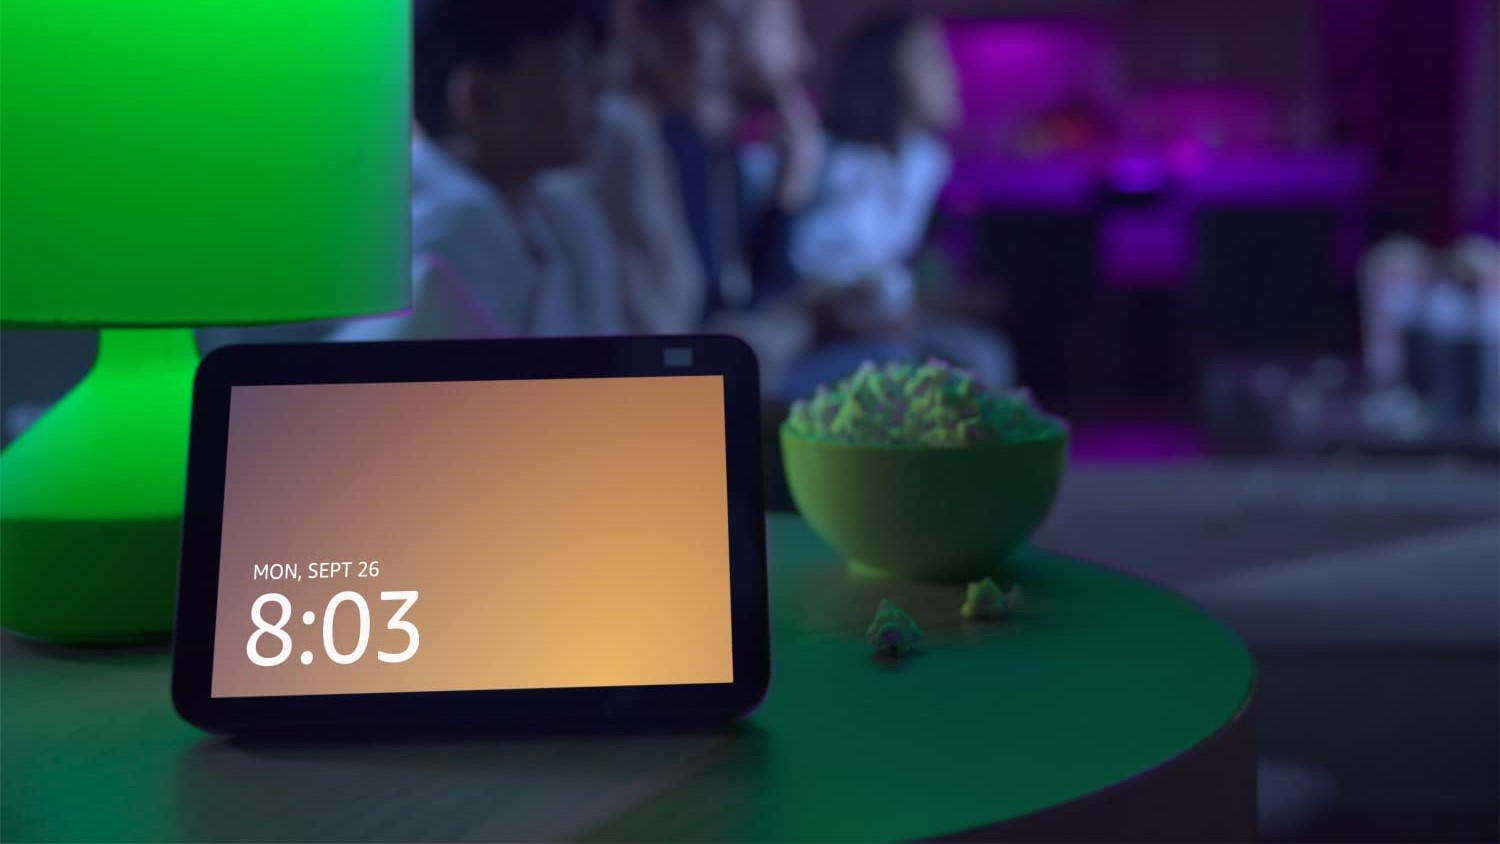 Deal Alert! Echo Show Devices Are on Sale Starting at $34.99!